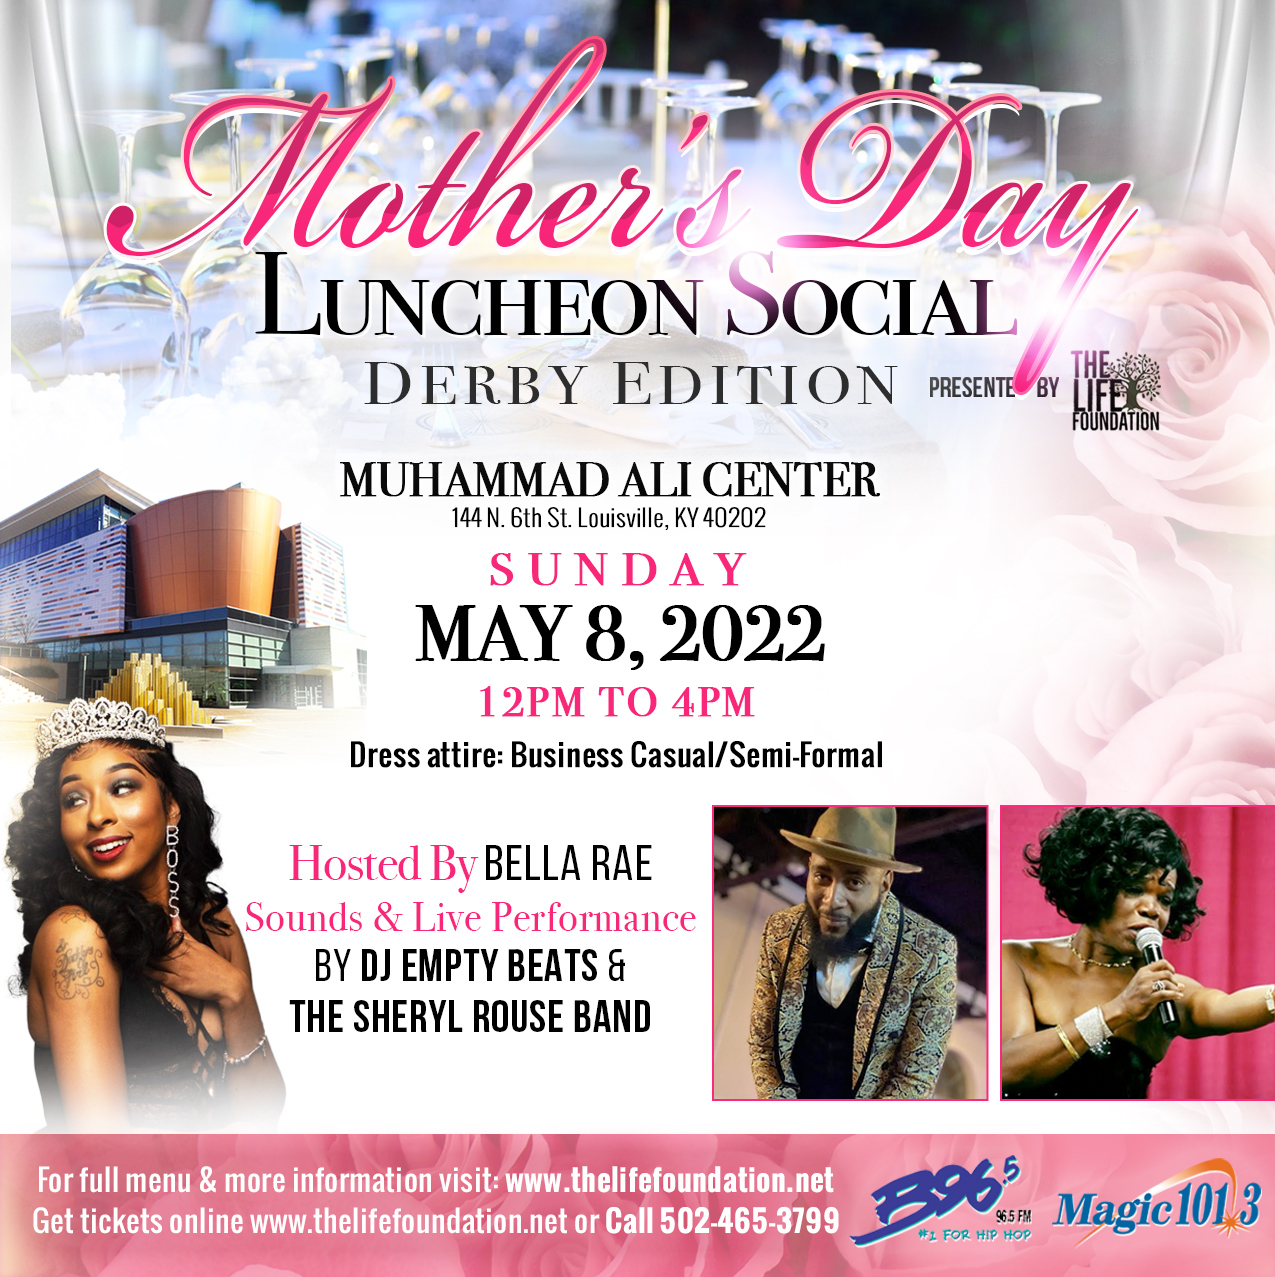 <h1 class="tribe-events-single-event-title">The Life Foundation & Magic 101.3 Present the Mother’s Day Luncheon Social</h1>